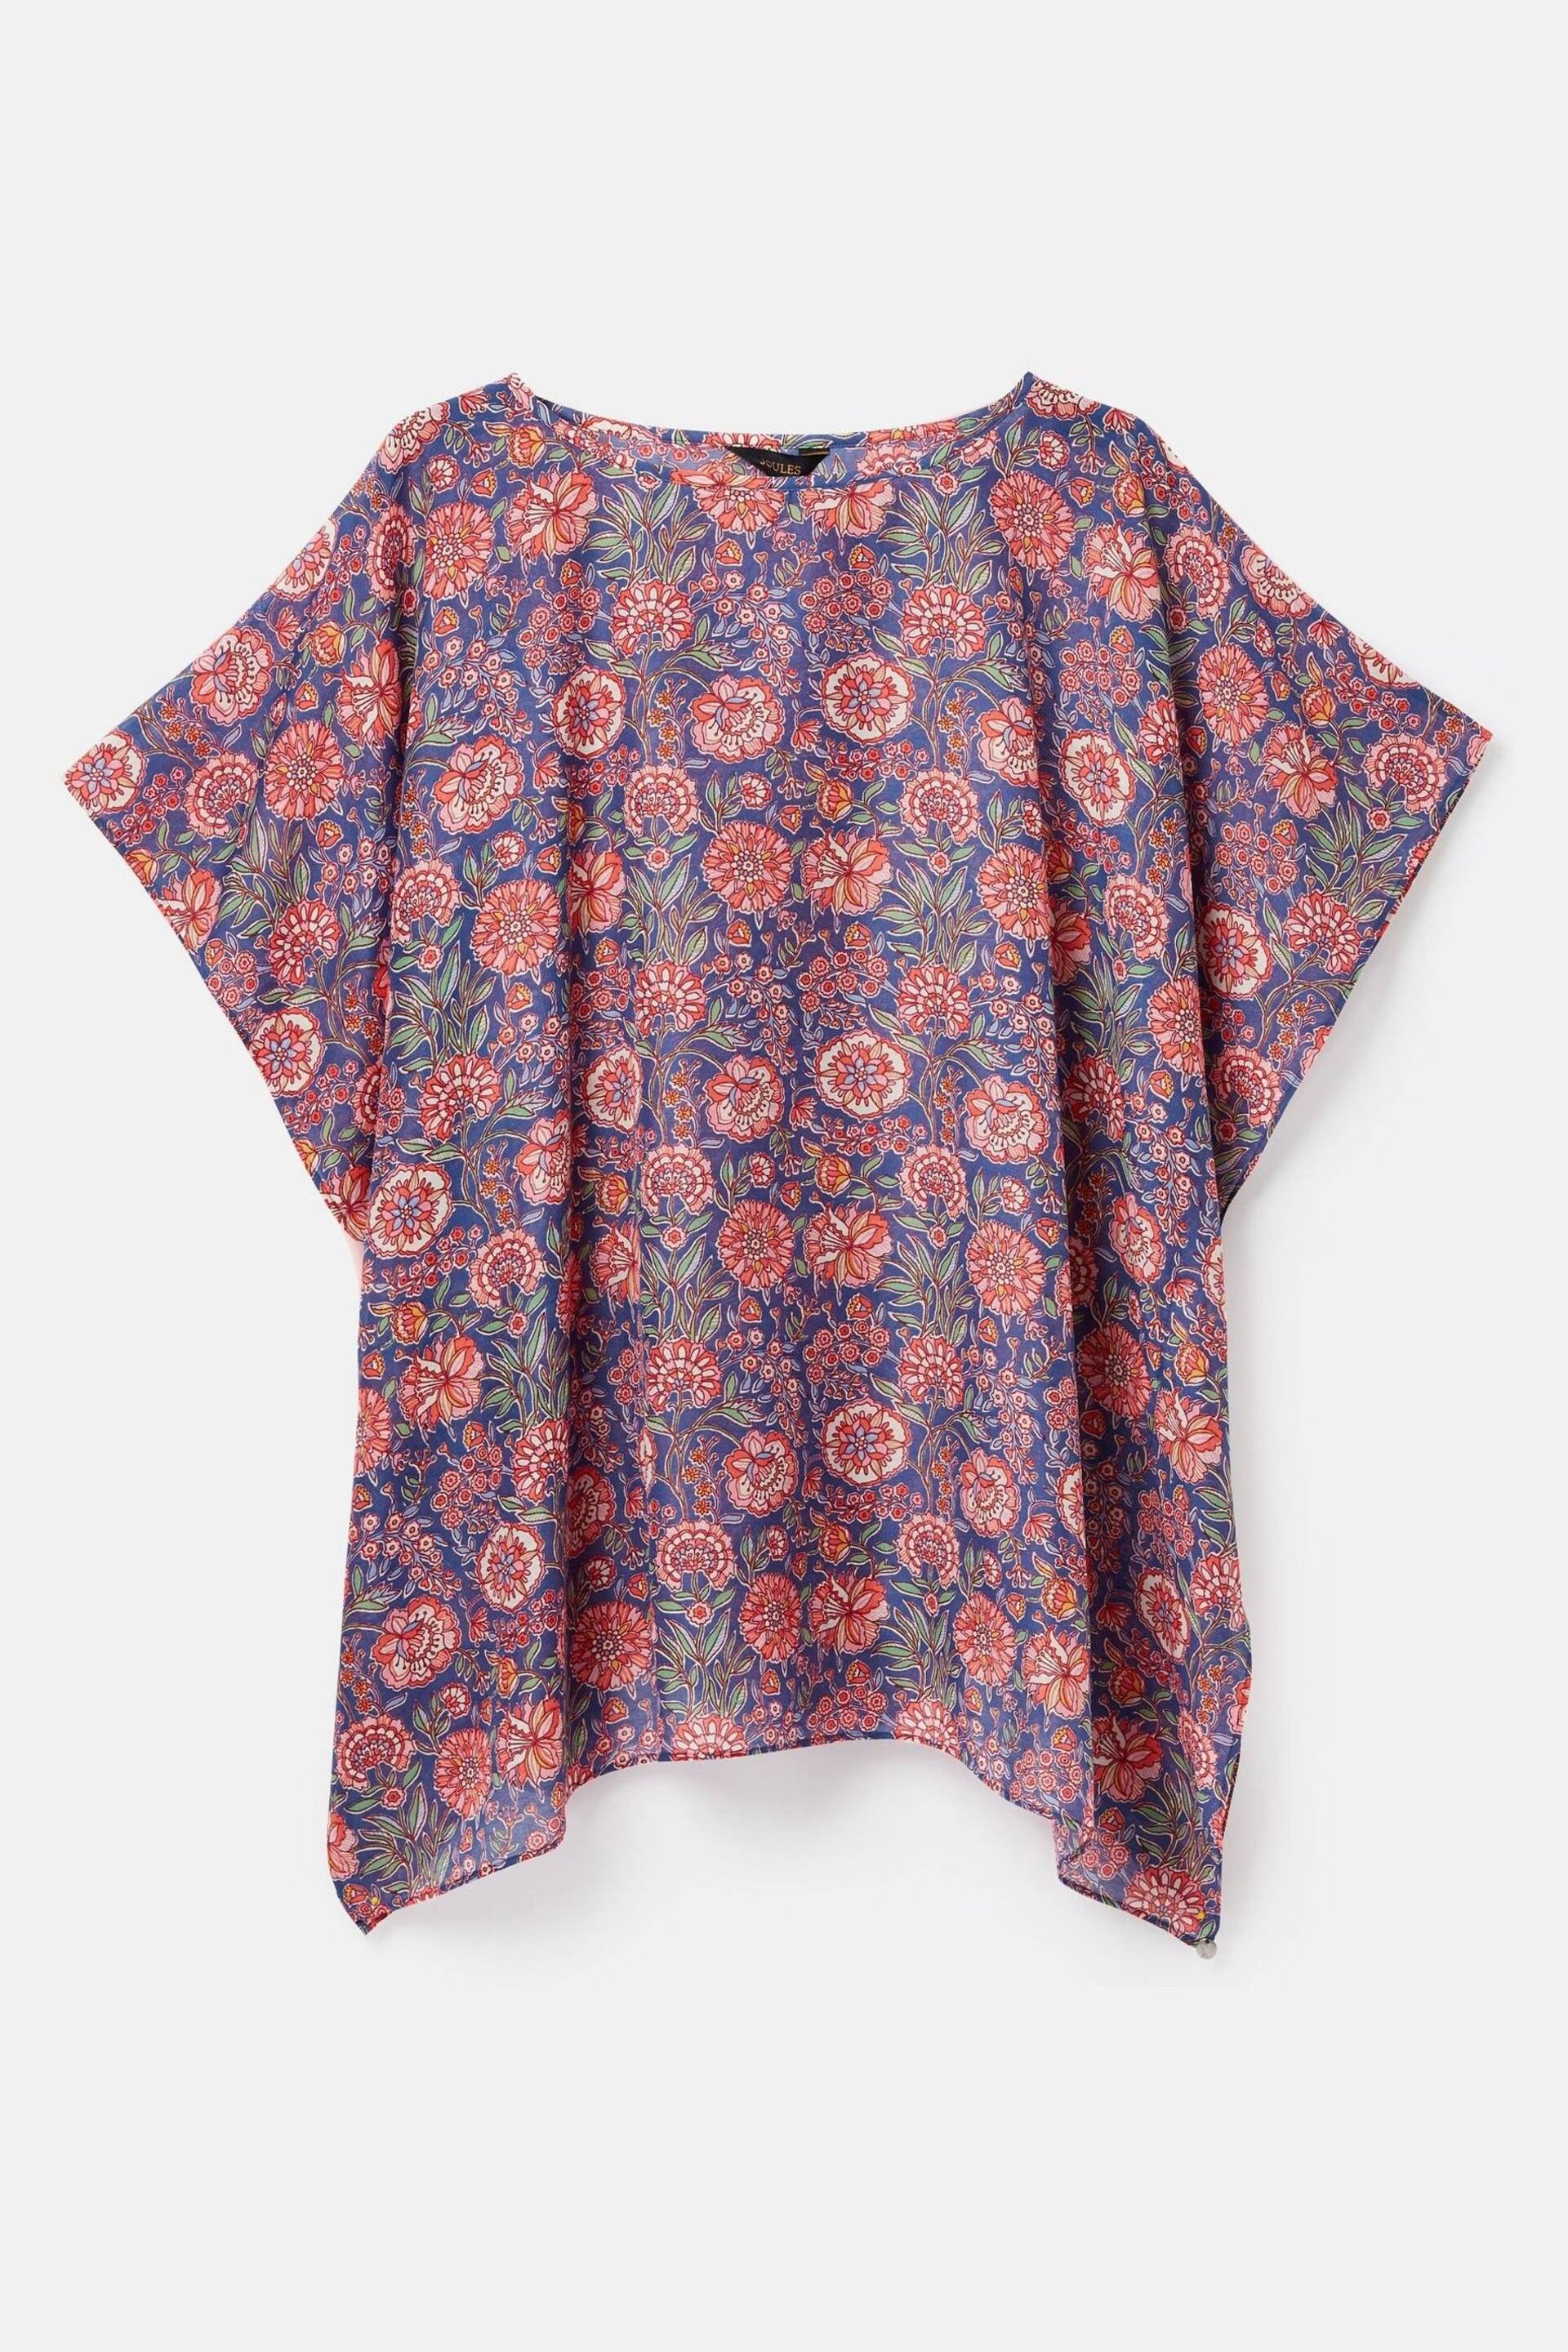 Joules Rosanna Multi Beach Cover-Up - Image 7 of 7